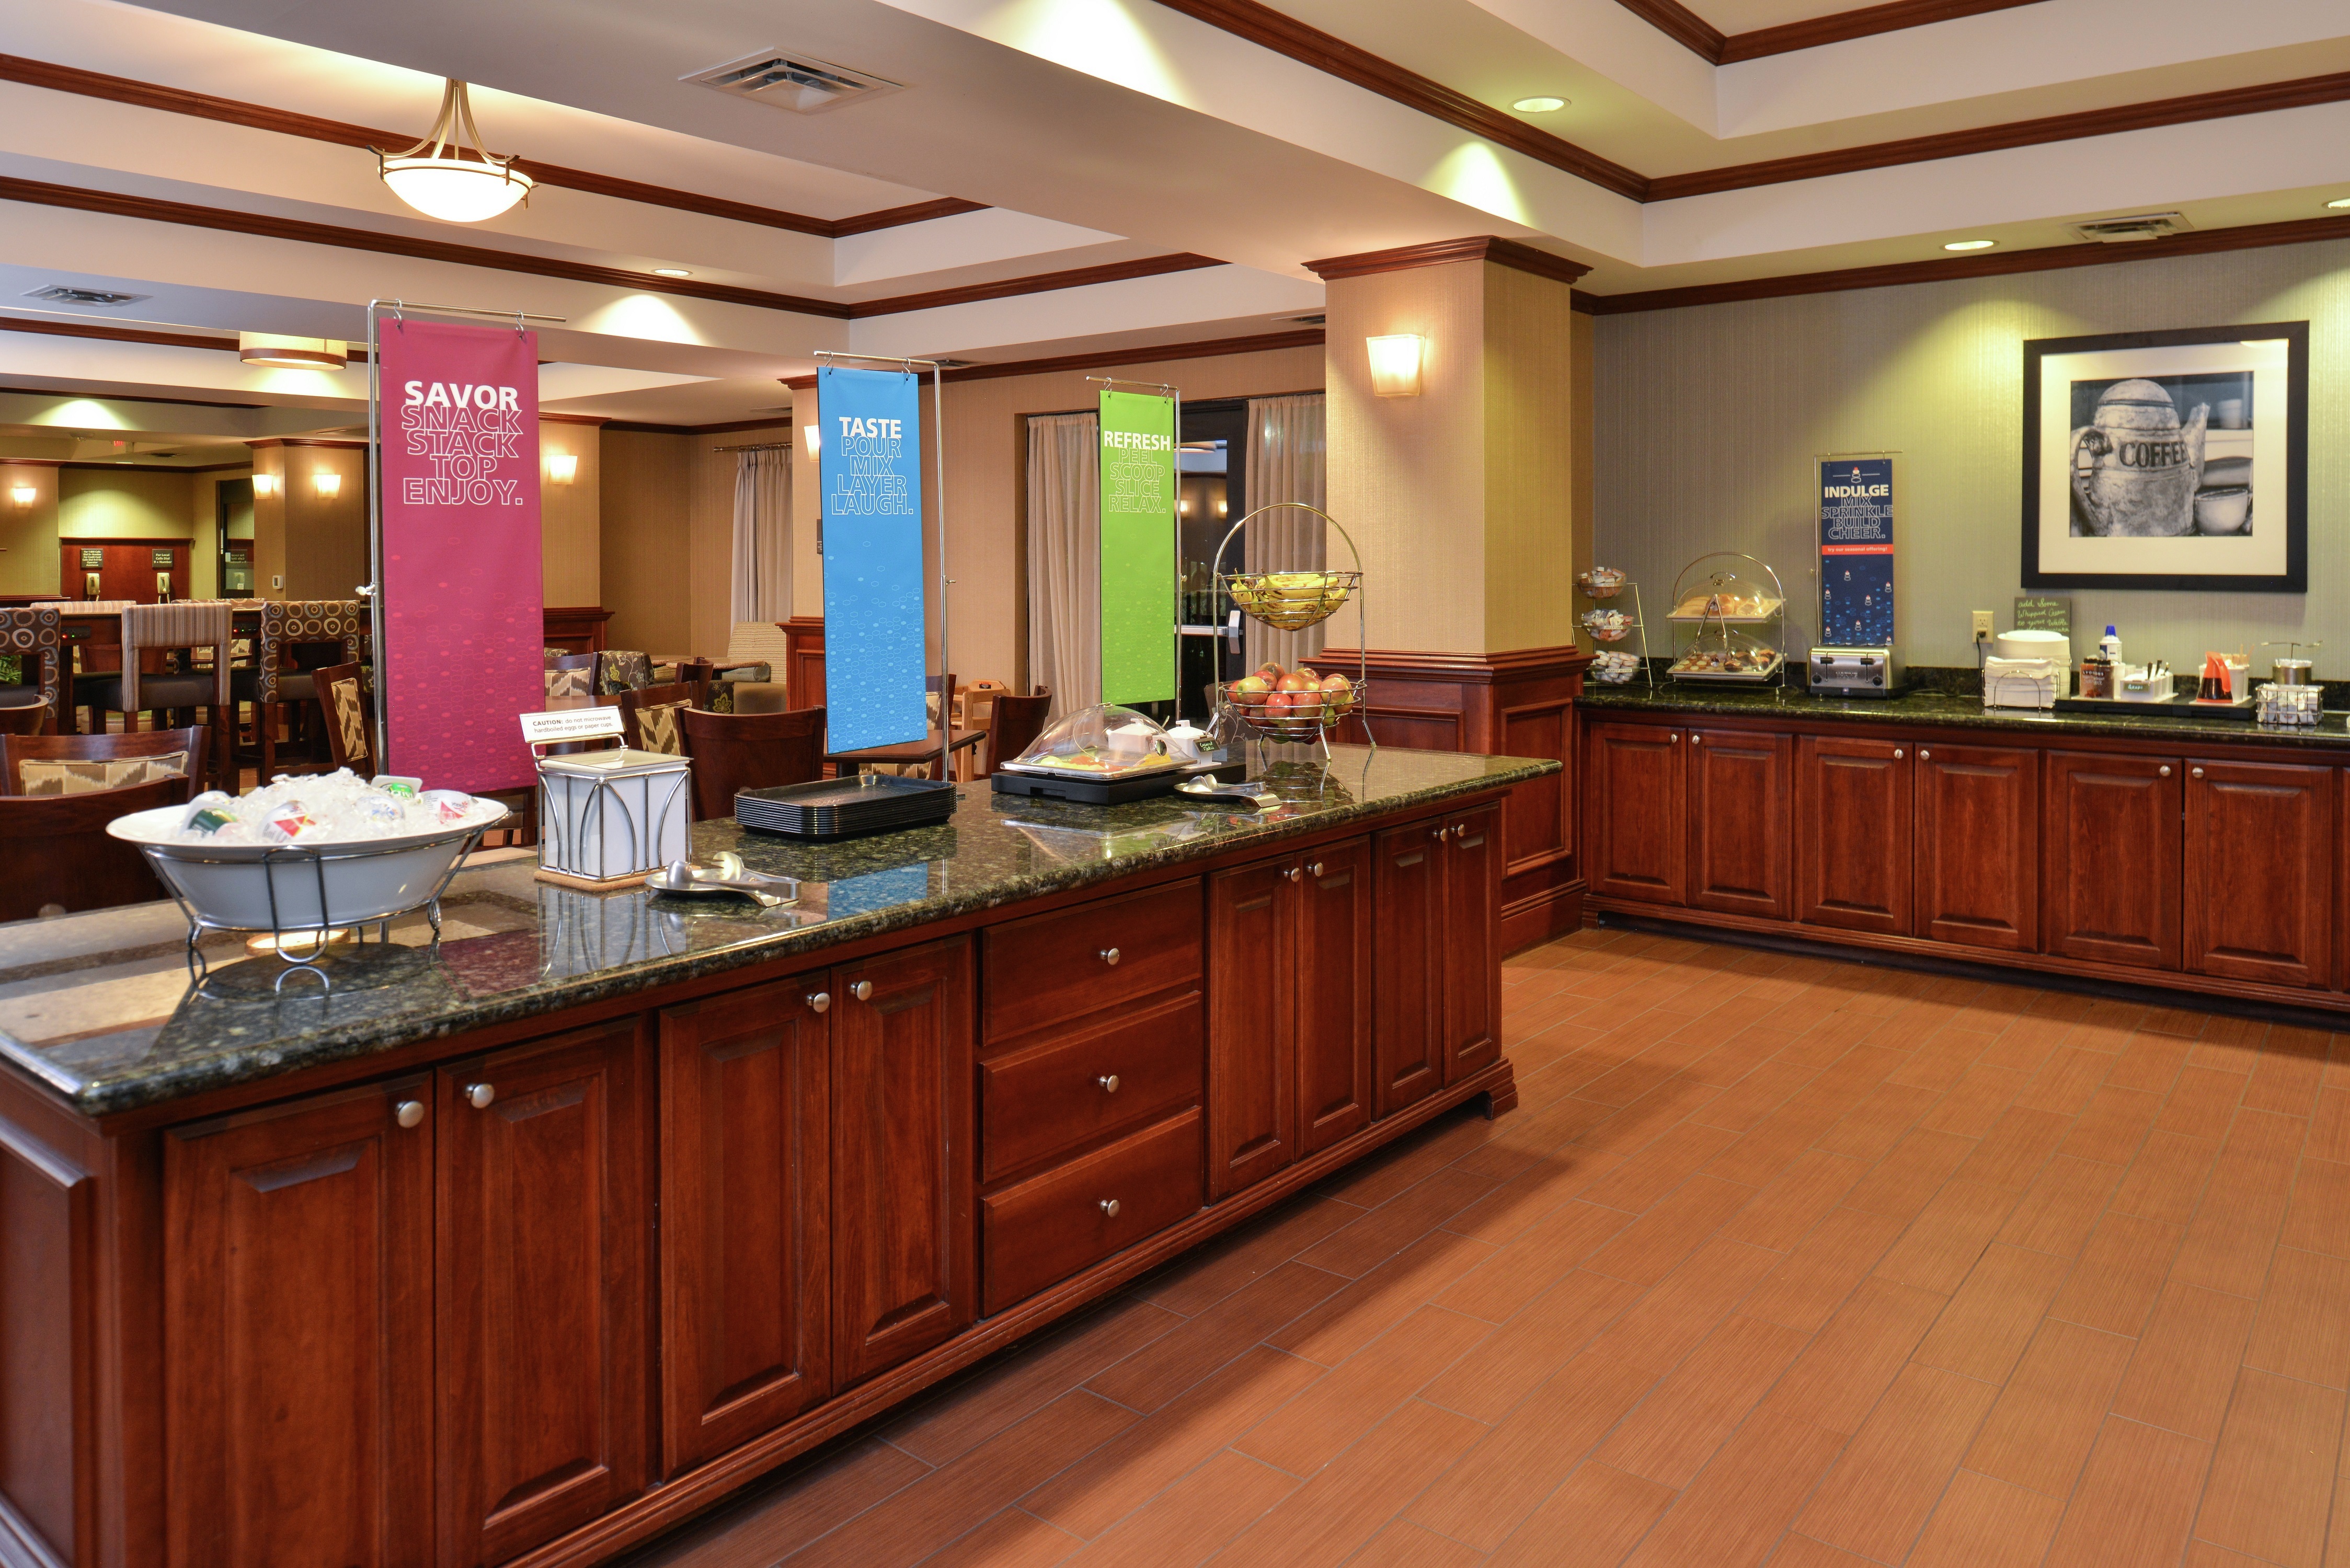 Hot and Cold Buffet Selections on Counters of Breakfast Service Area